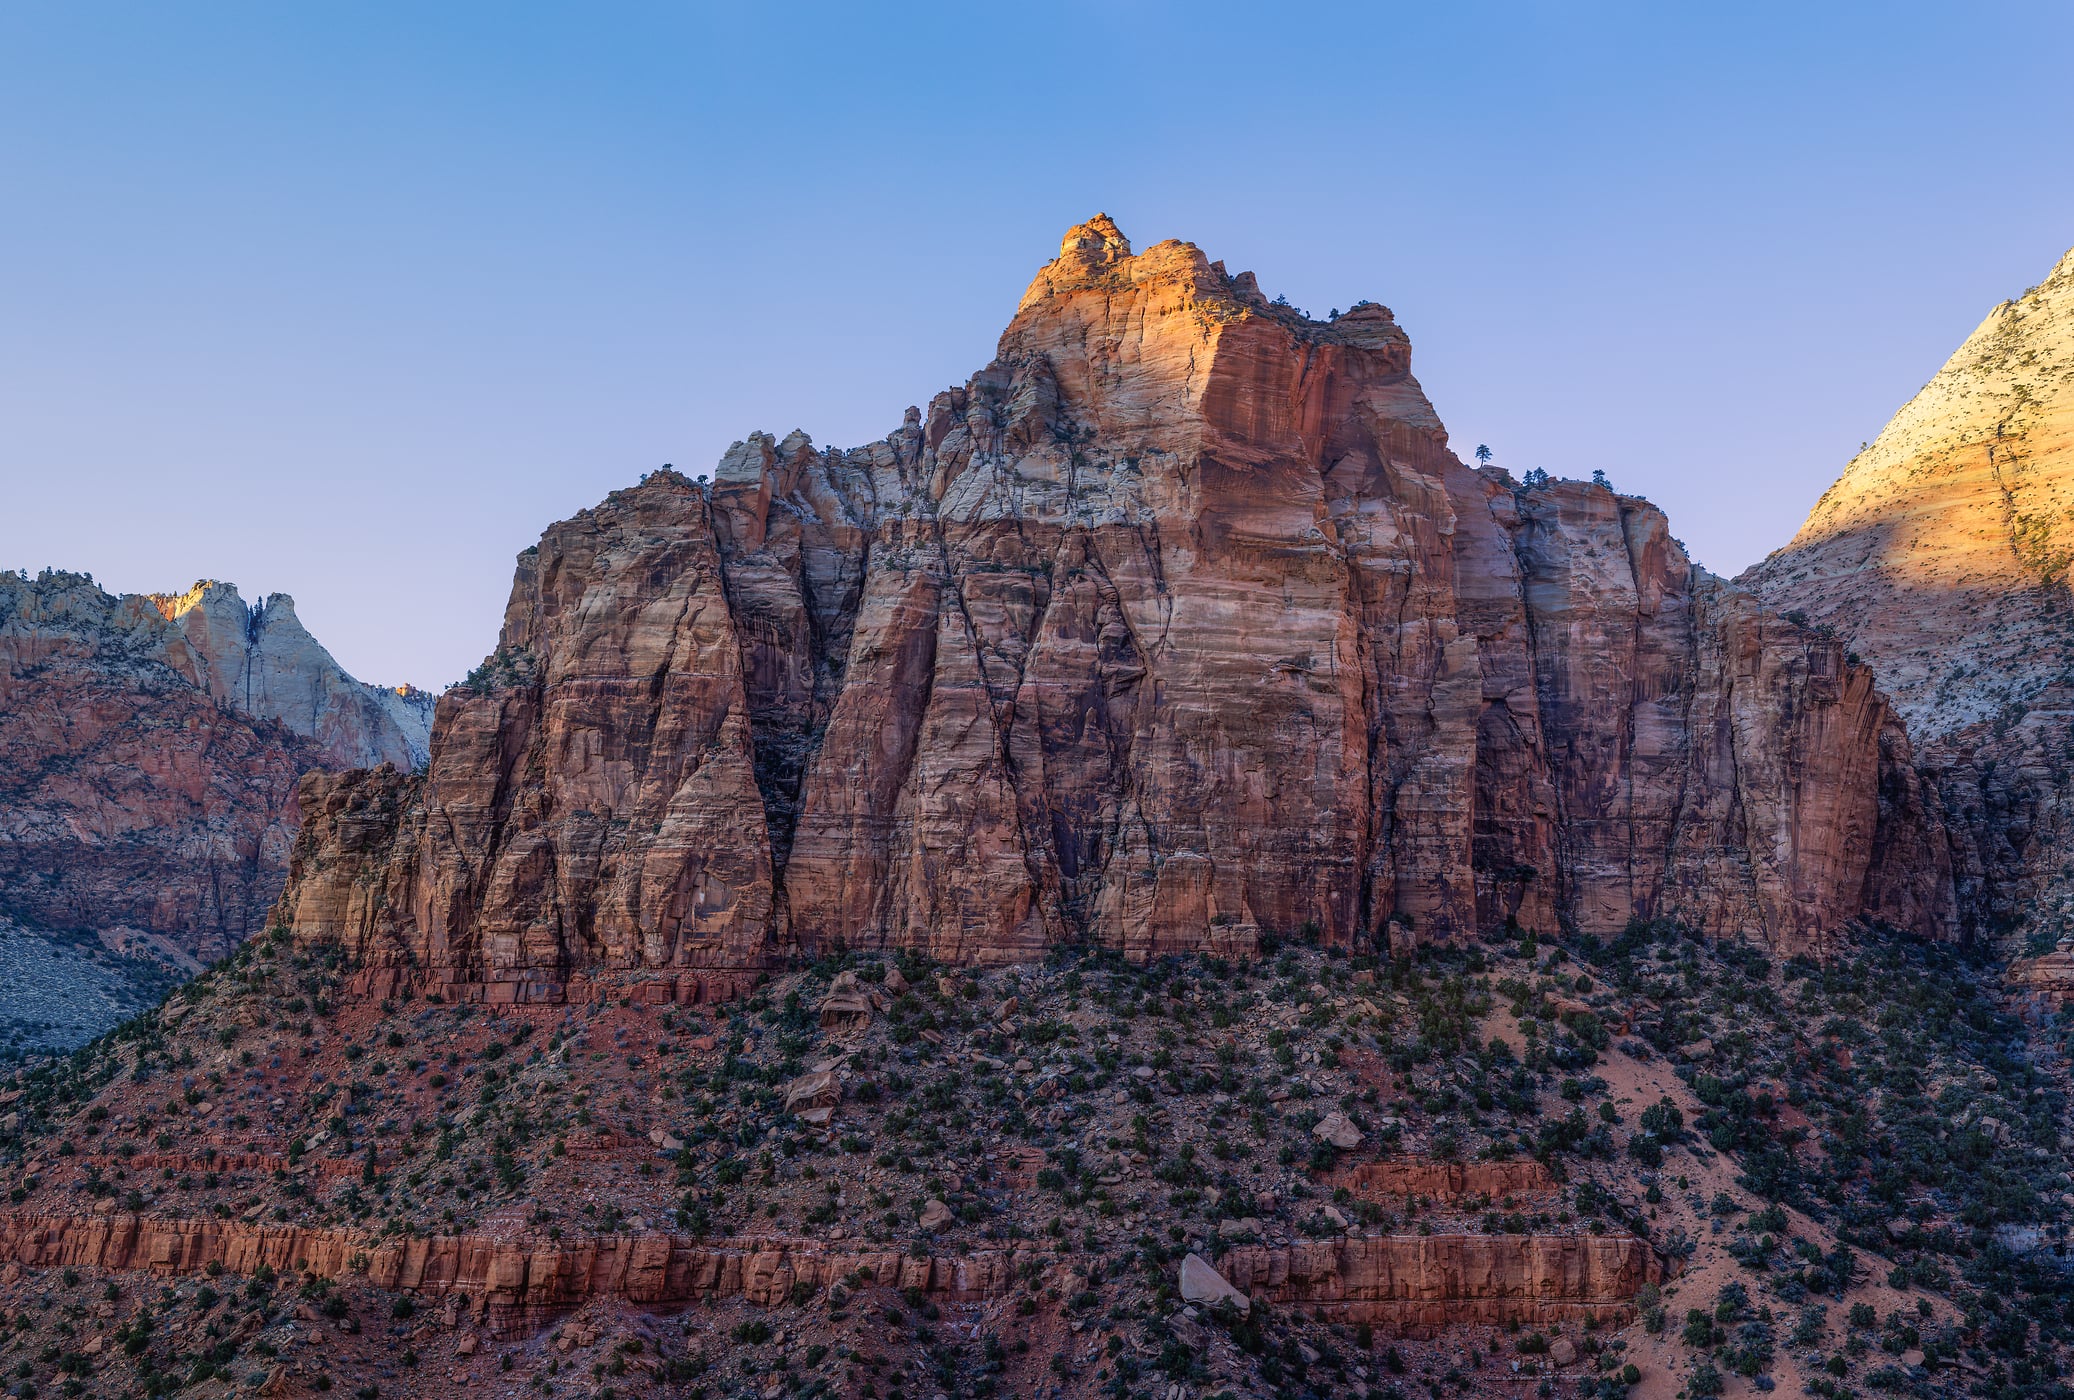 323 megapixels! A very high resolution, framed photo print of a large rock formation in Zion National Park at dusk; landscape photograph created by Chris Blake in Zion National Park, Utah.